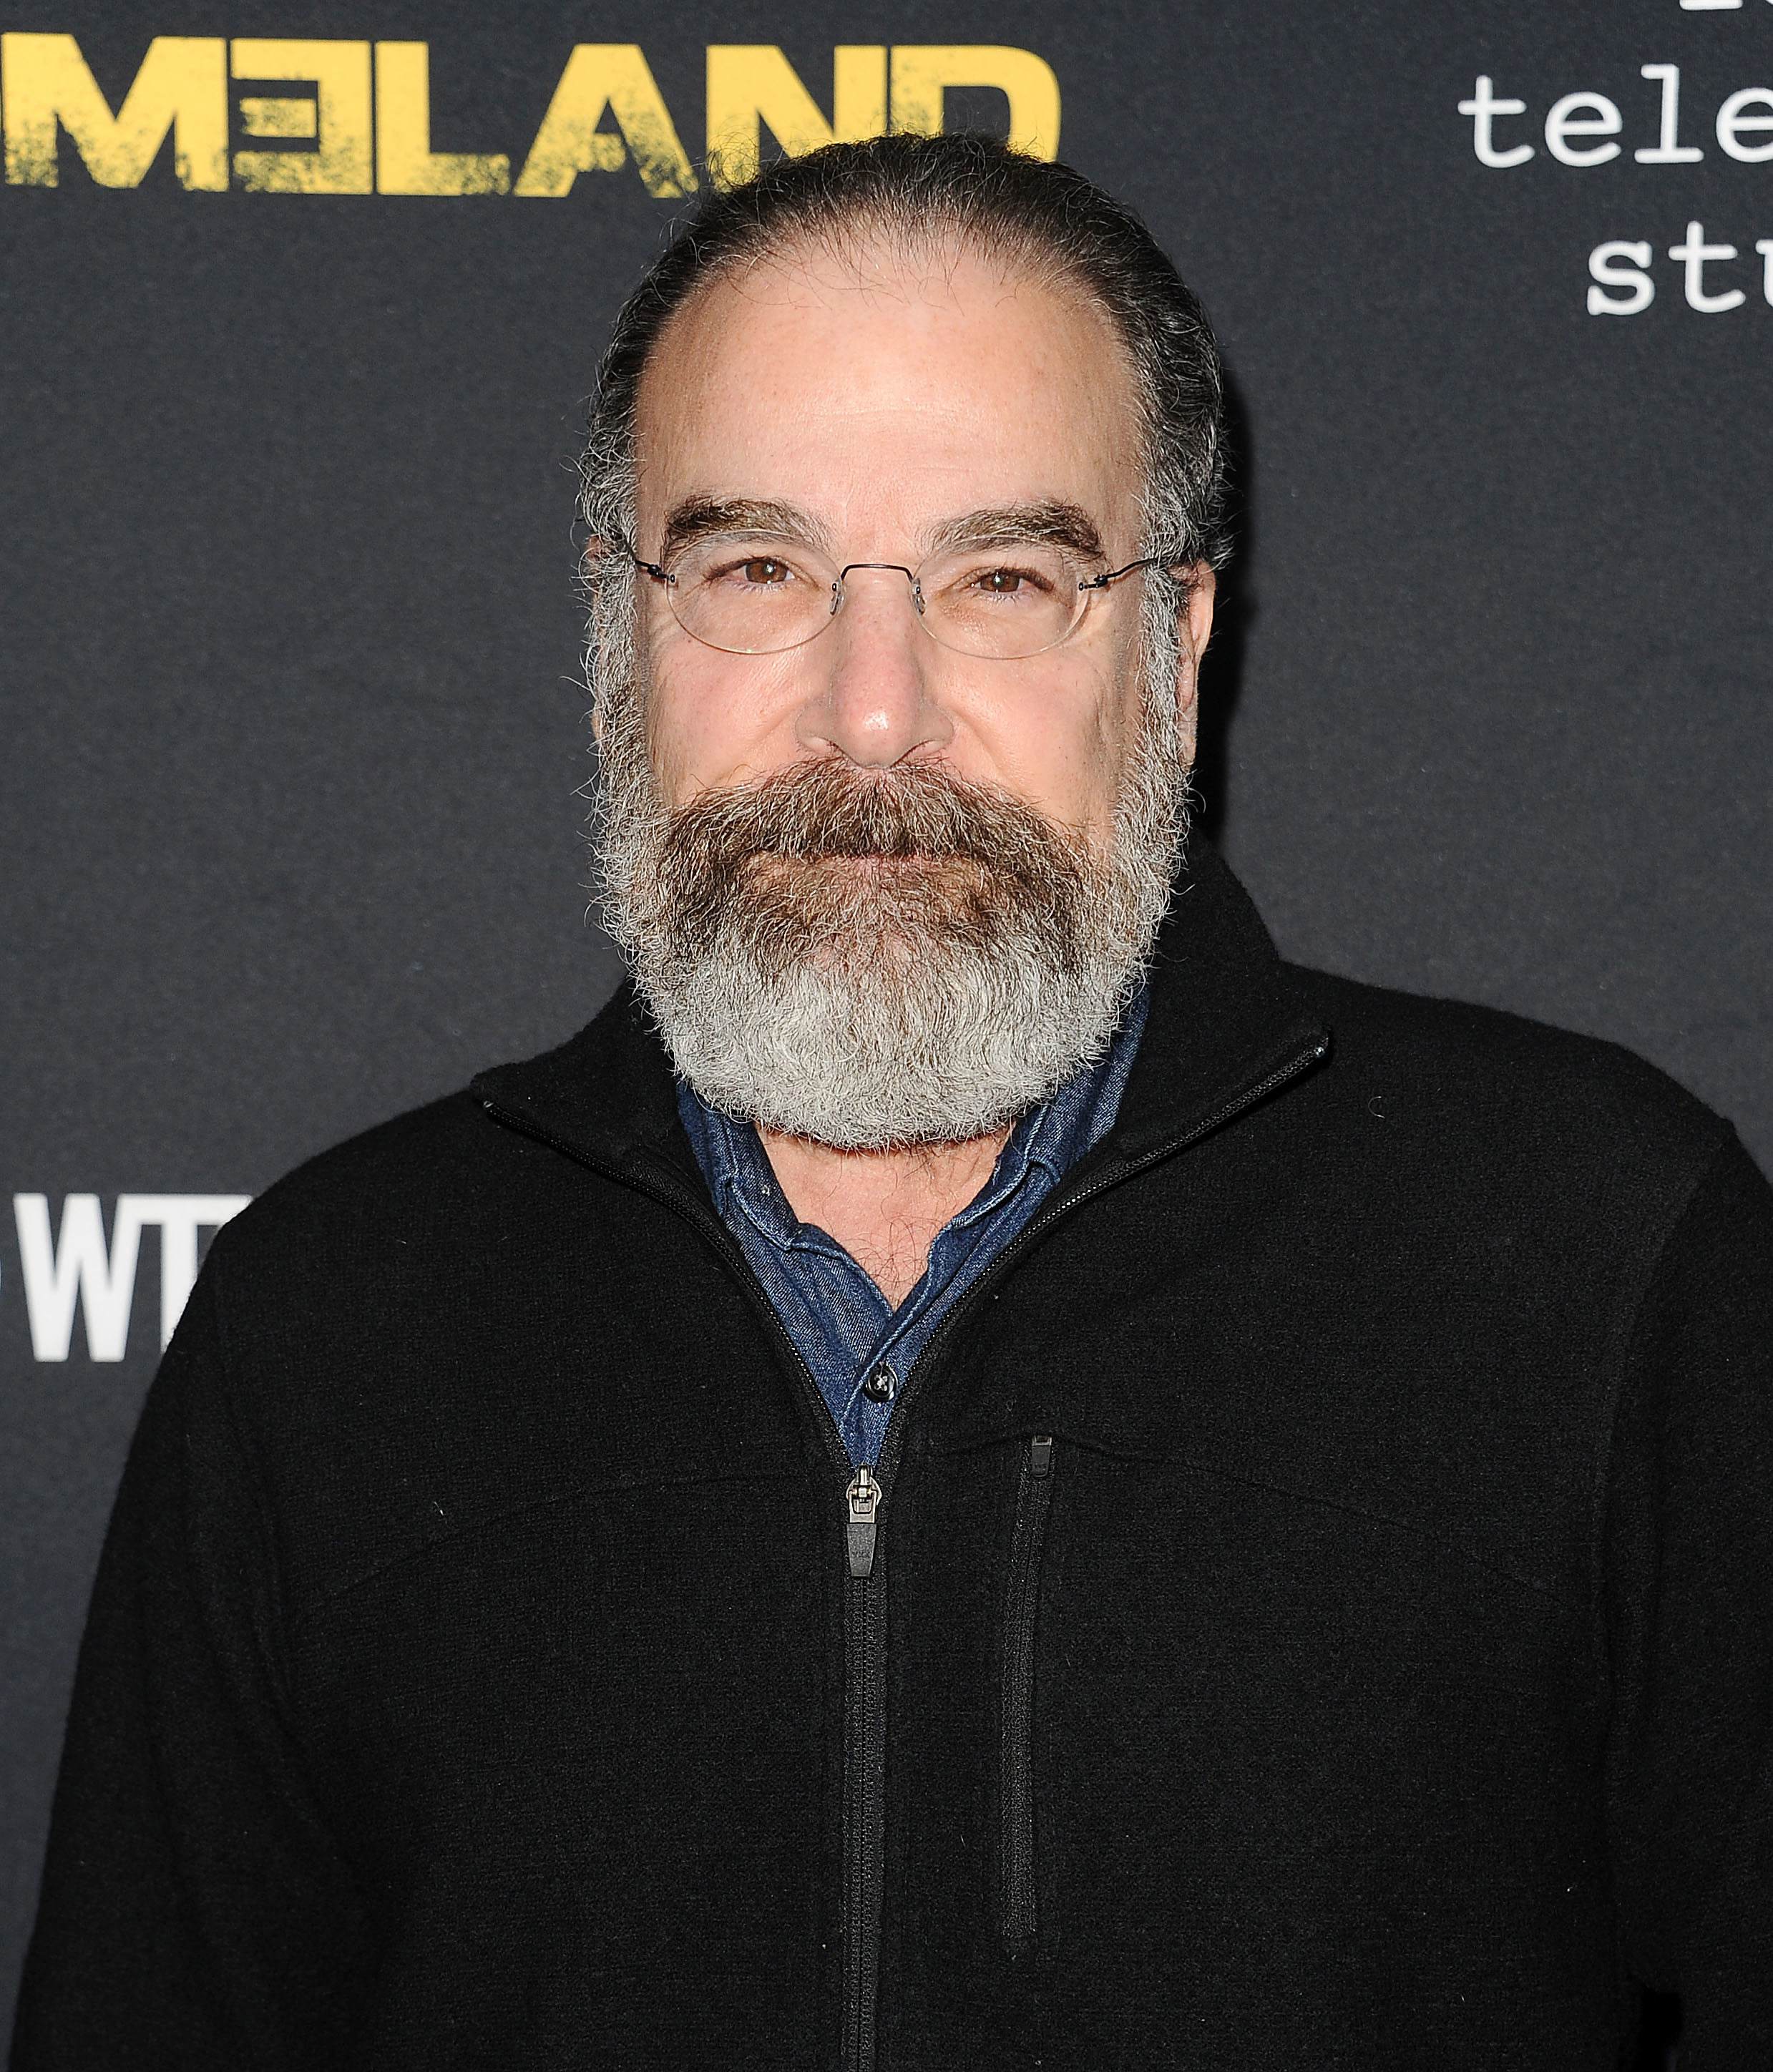 Mandy Patinkin is known for his roles in Criminal Minds and Homeland.